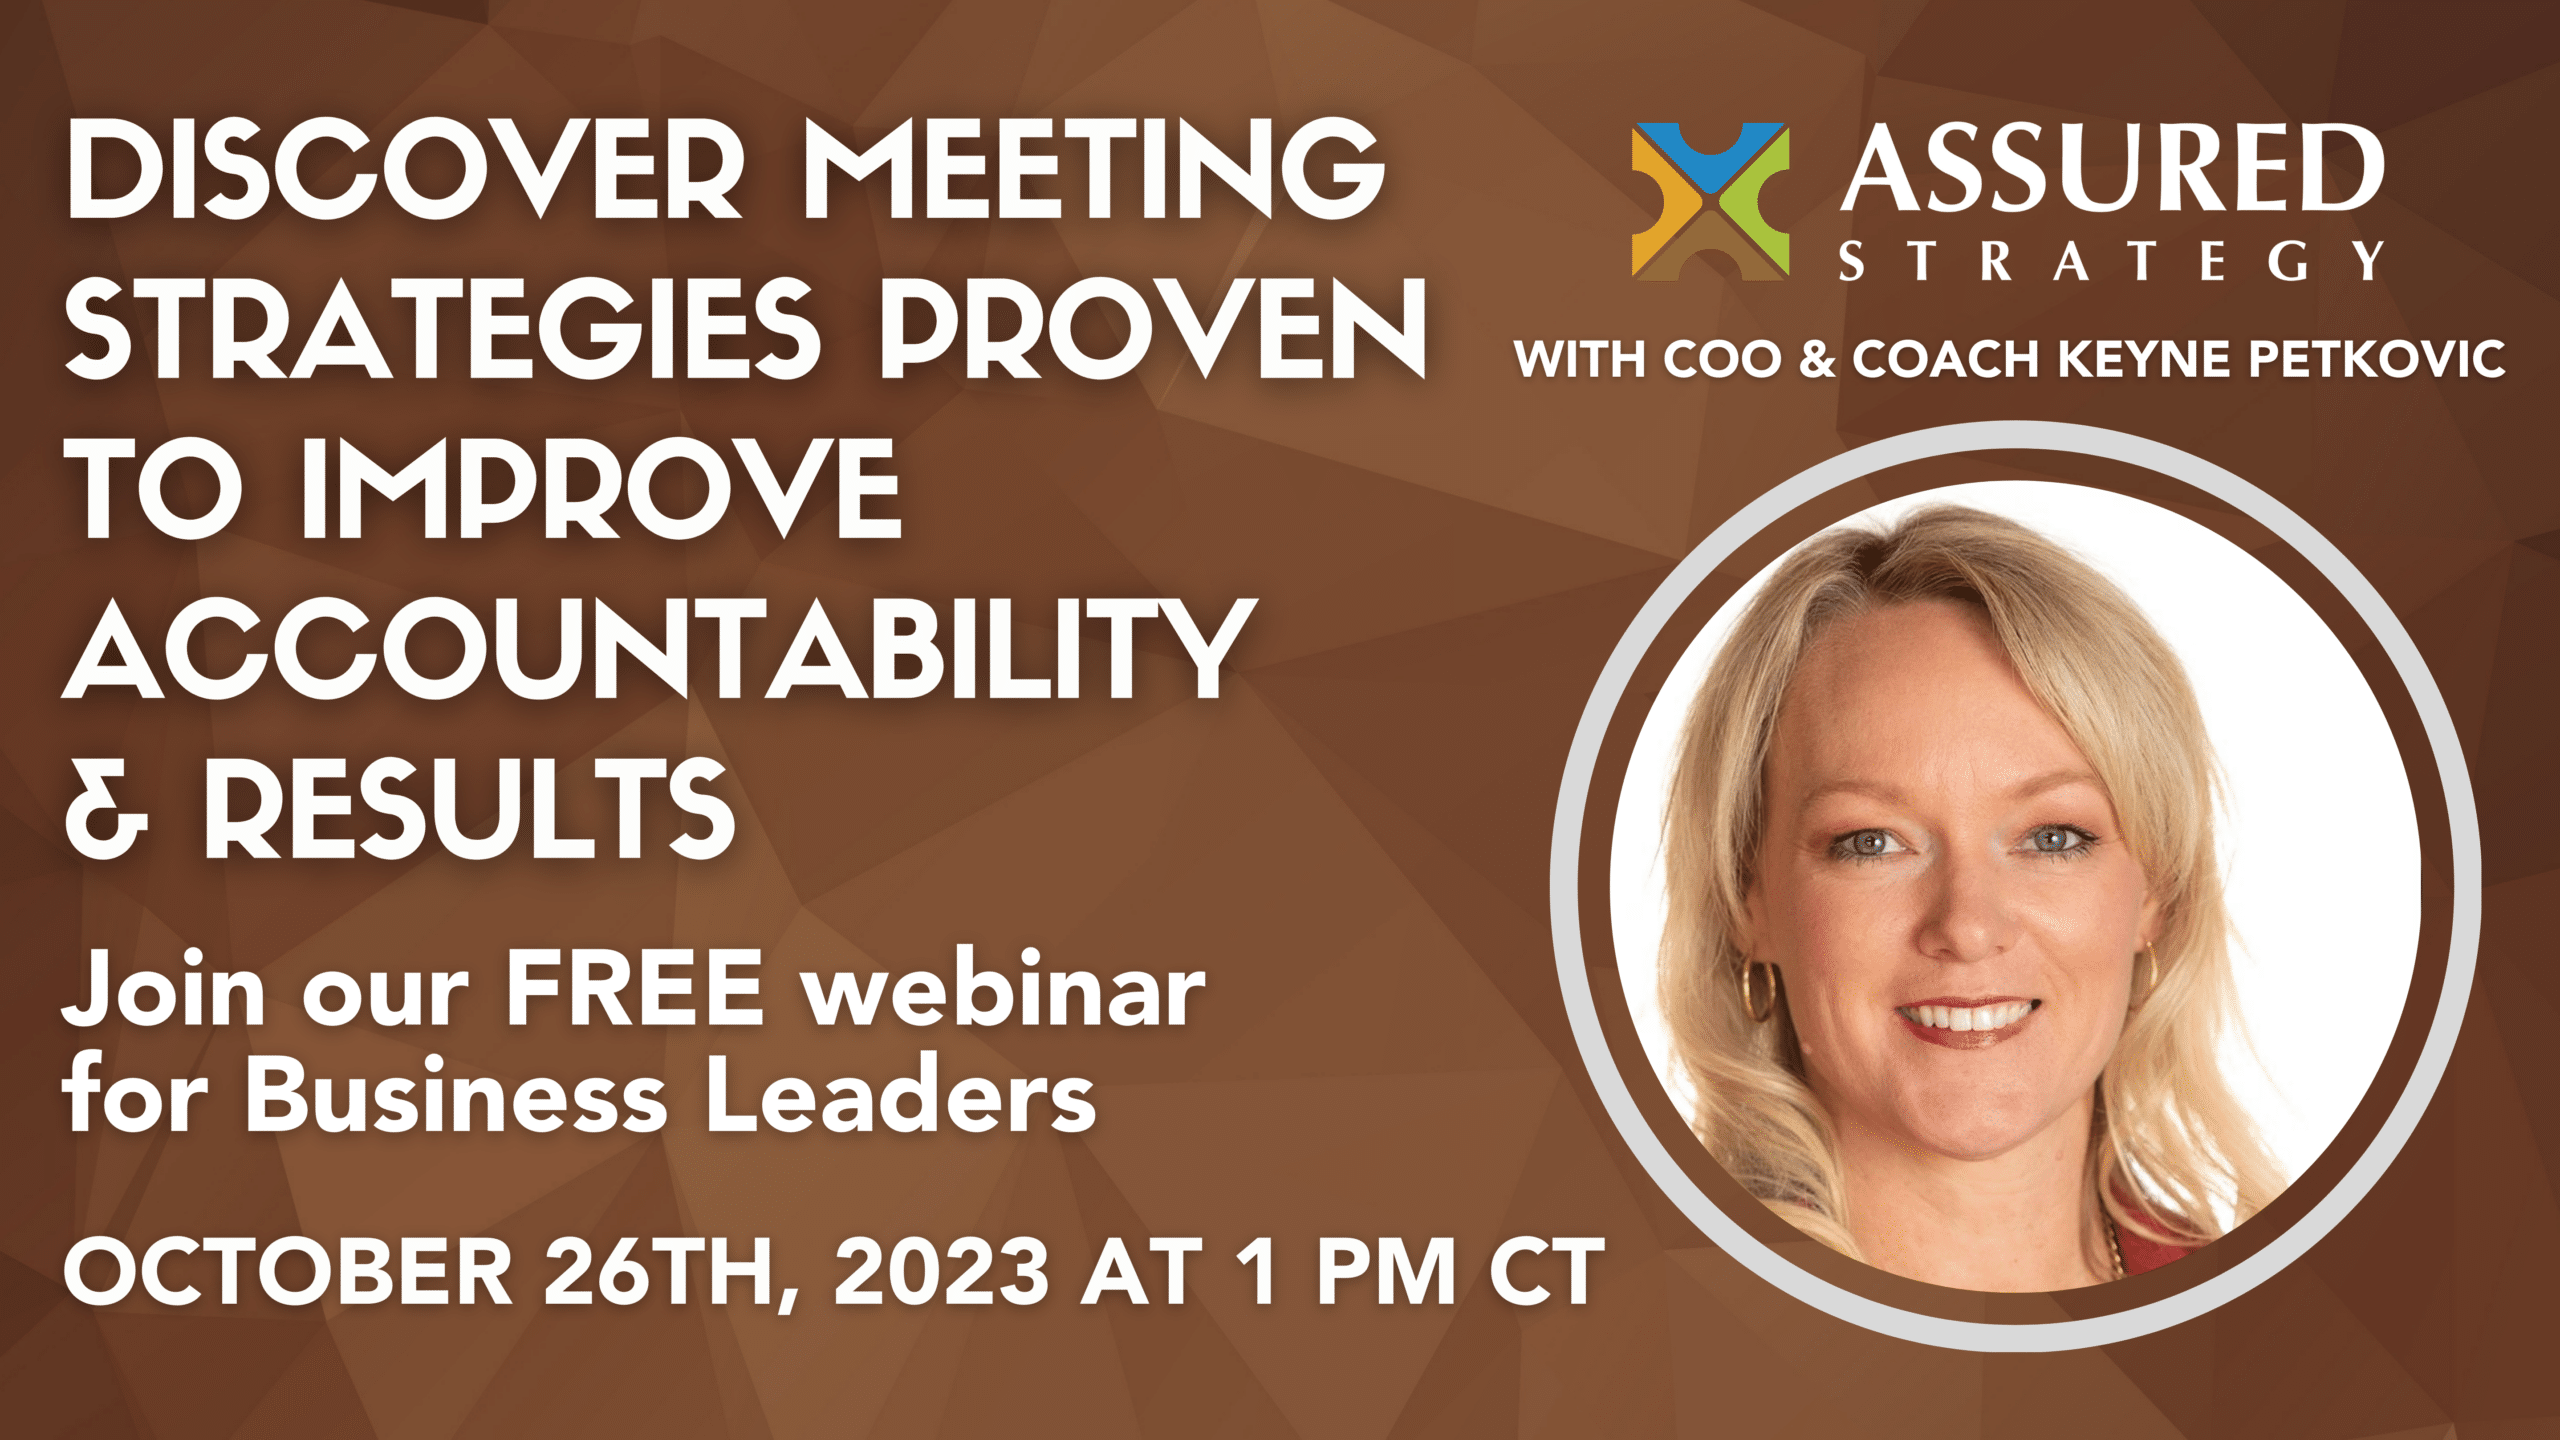 Free Webinar: How to Build Accountability through Meeting Rhythms – October 26th from 1-2pm CT